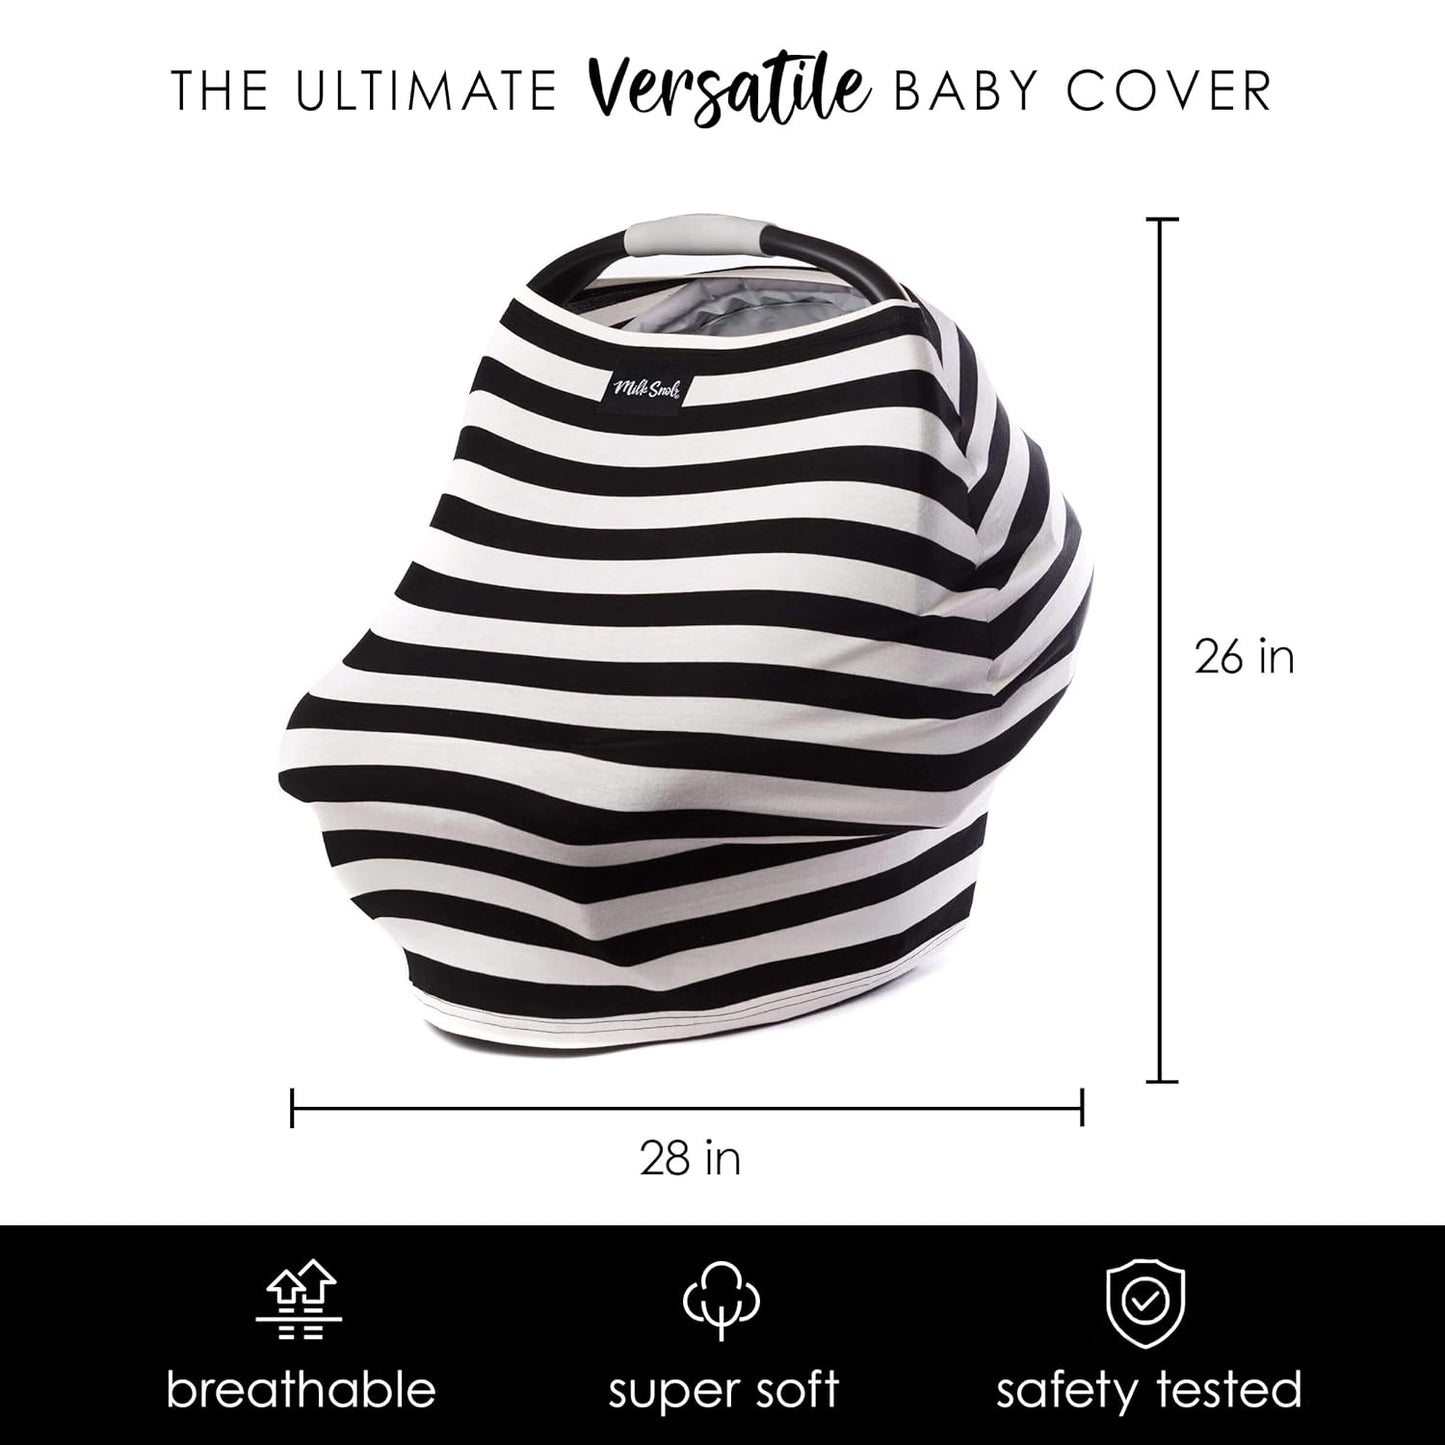 Milk Snob Original 5-in-1 Cover - Added Privacy for Breastfeeding, Baby Car Seat, Carrier, Stroller, High Chair, Shopping Cart, Lounger Canopy - Newborn Essentials, Nursing Top, Soho